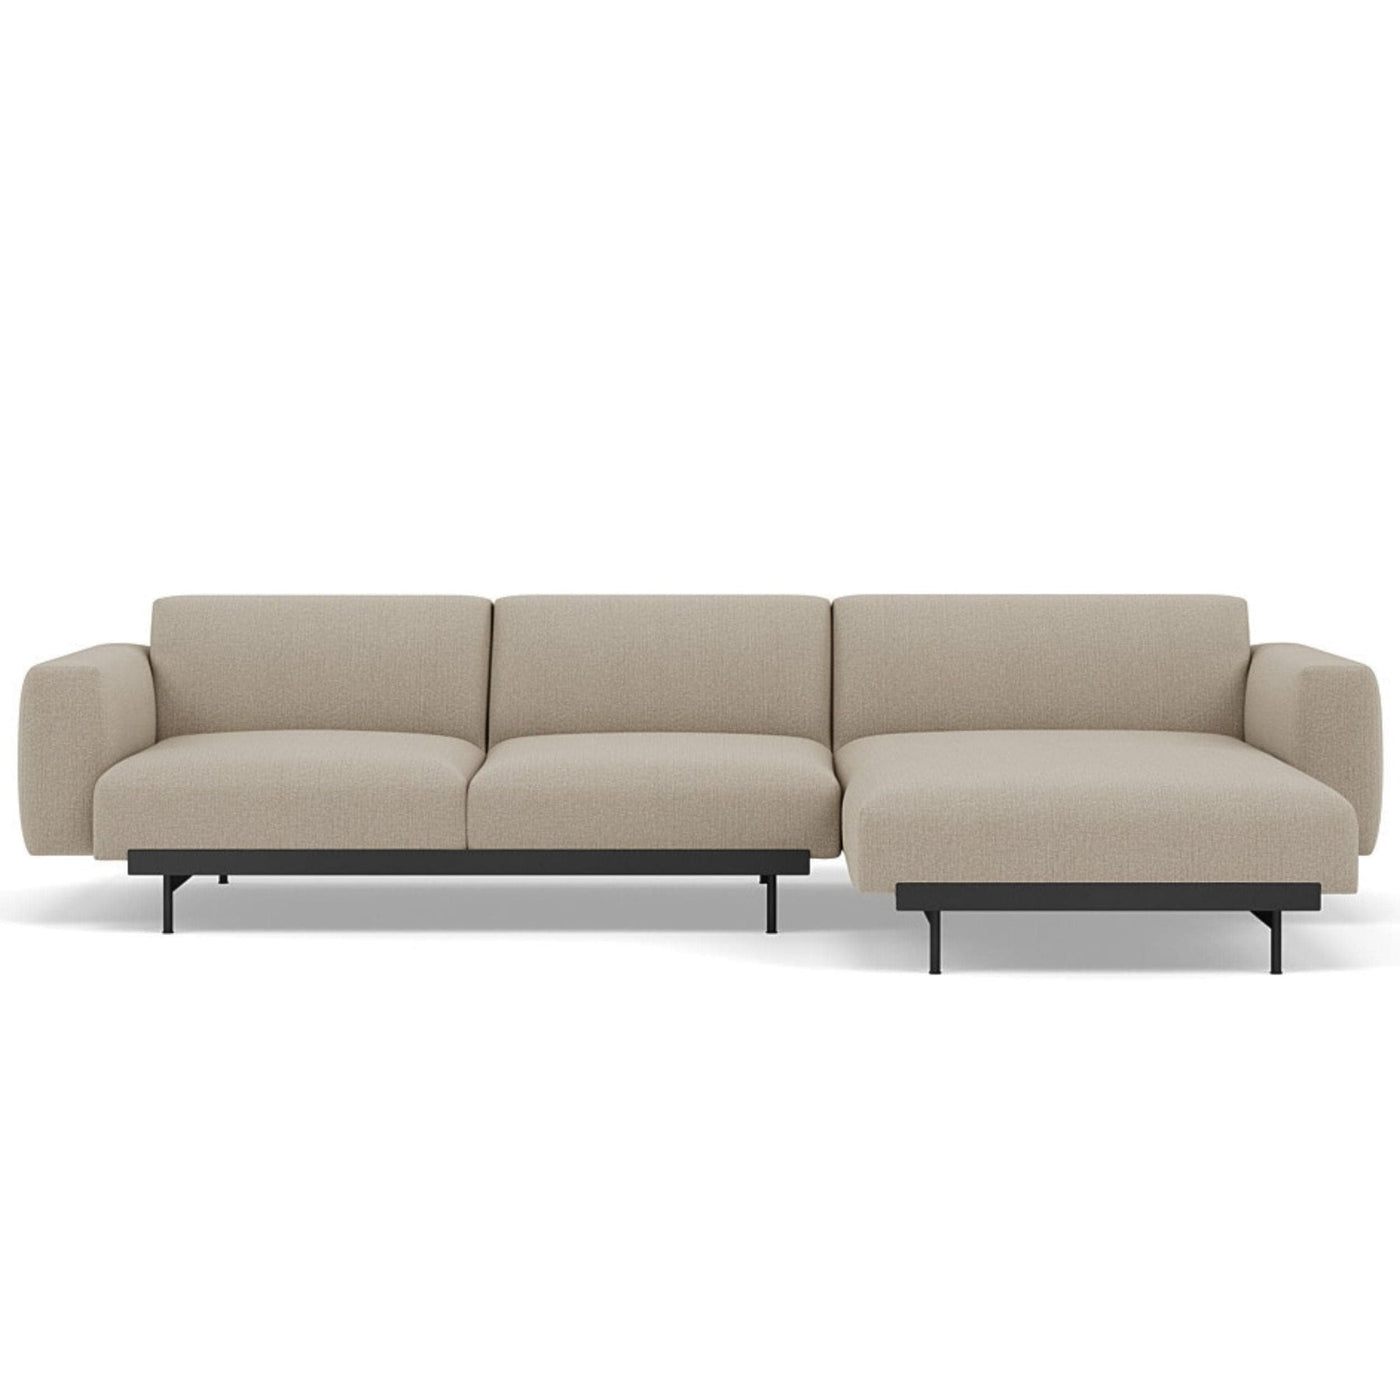 Muuto In Situ Modular 3 Seater Sofa, configuration 6. Made to order from someday designs. #colour_clay-10